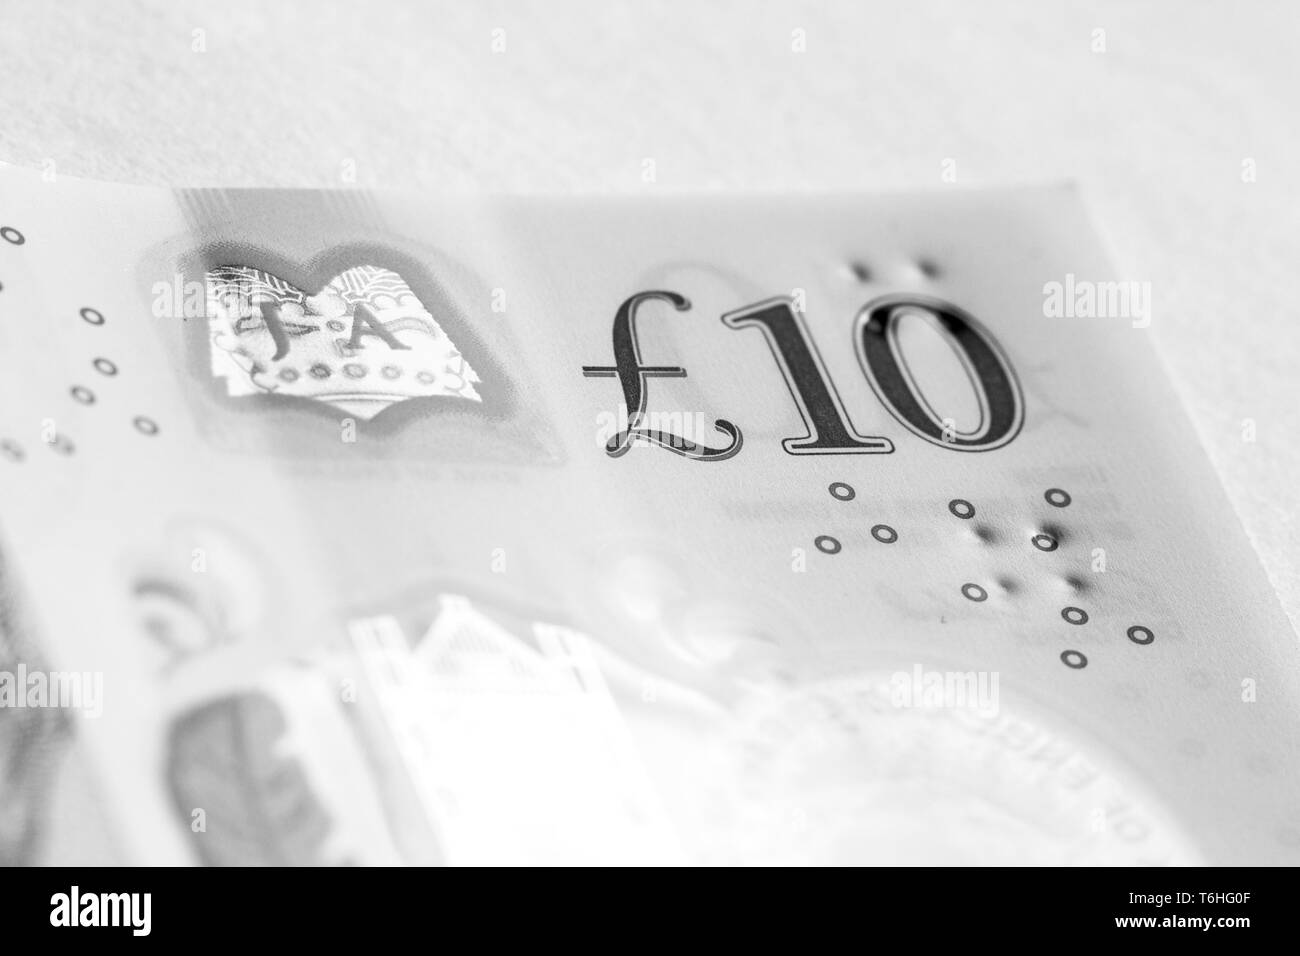 Close-up, macro photo of piece of £10 banknote. Ten pounds sterling. Stock Photo